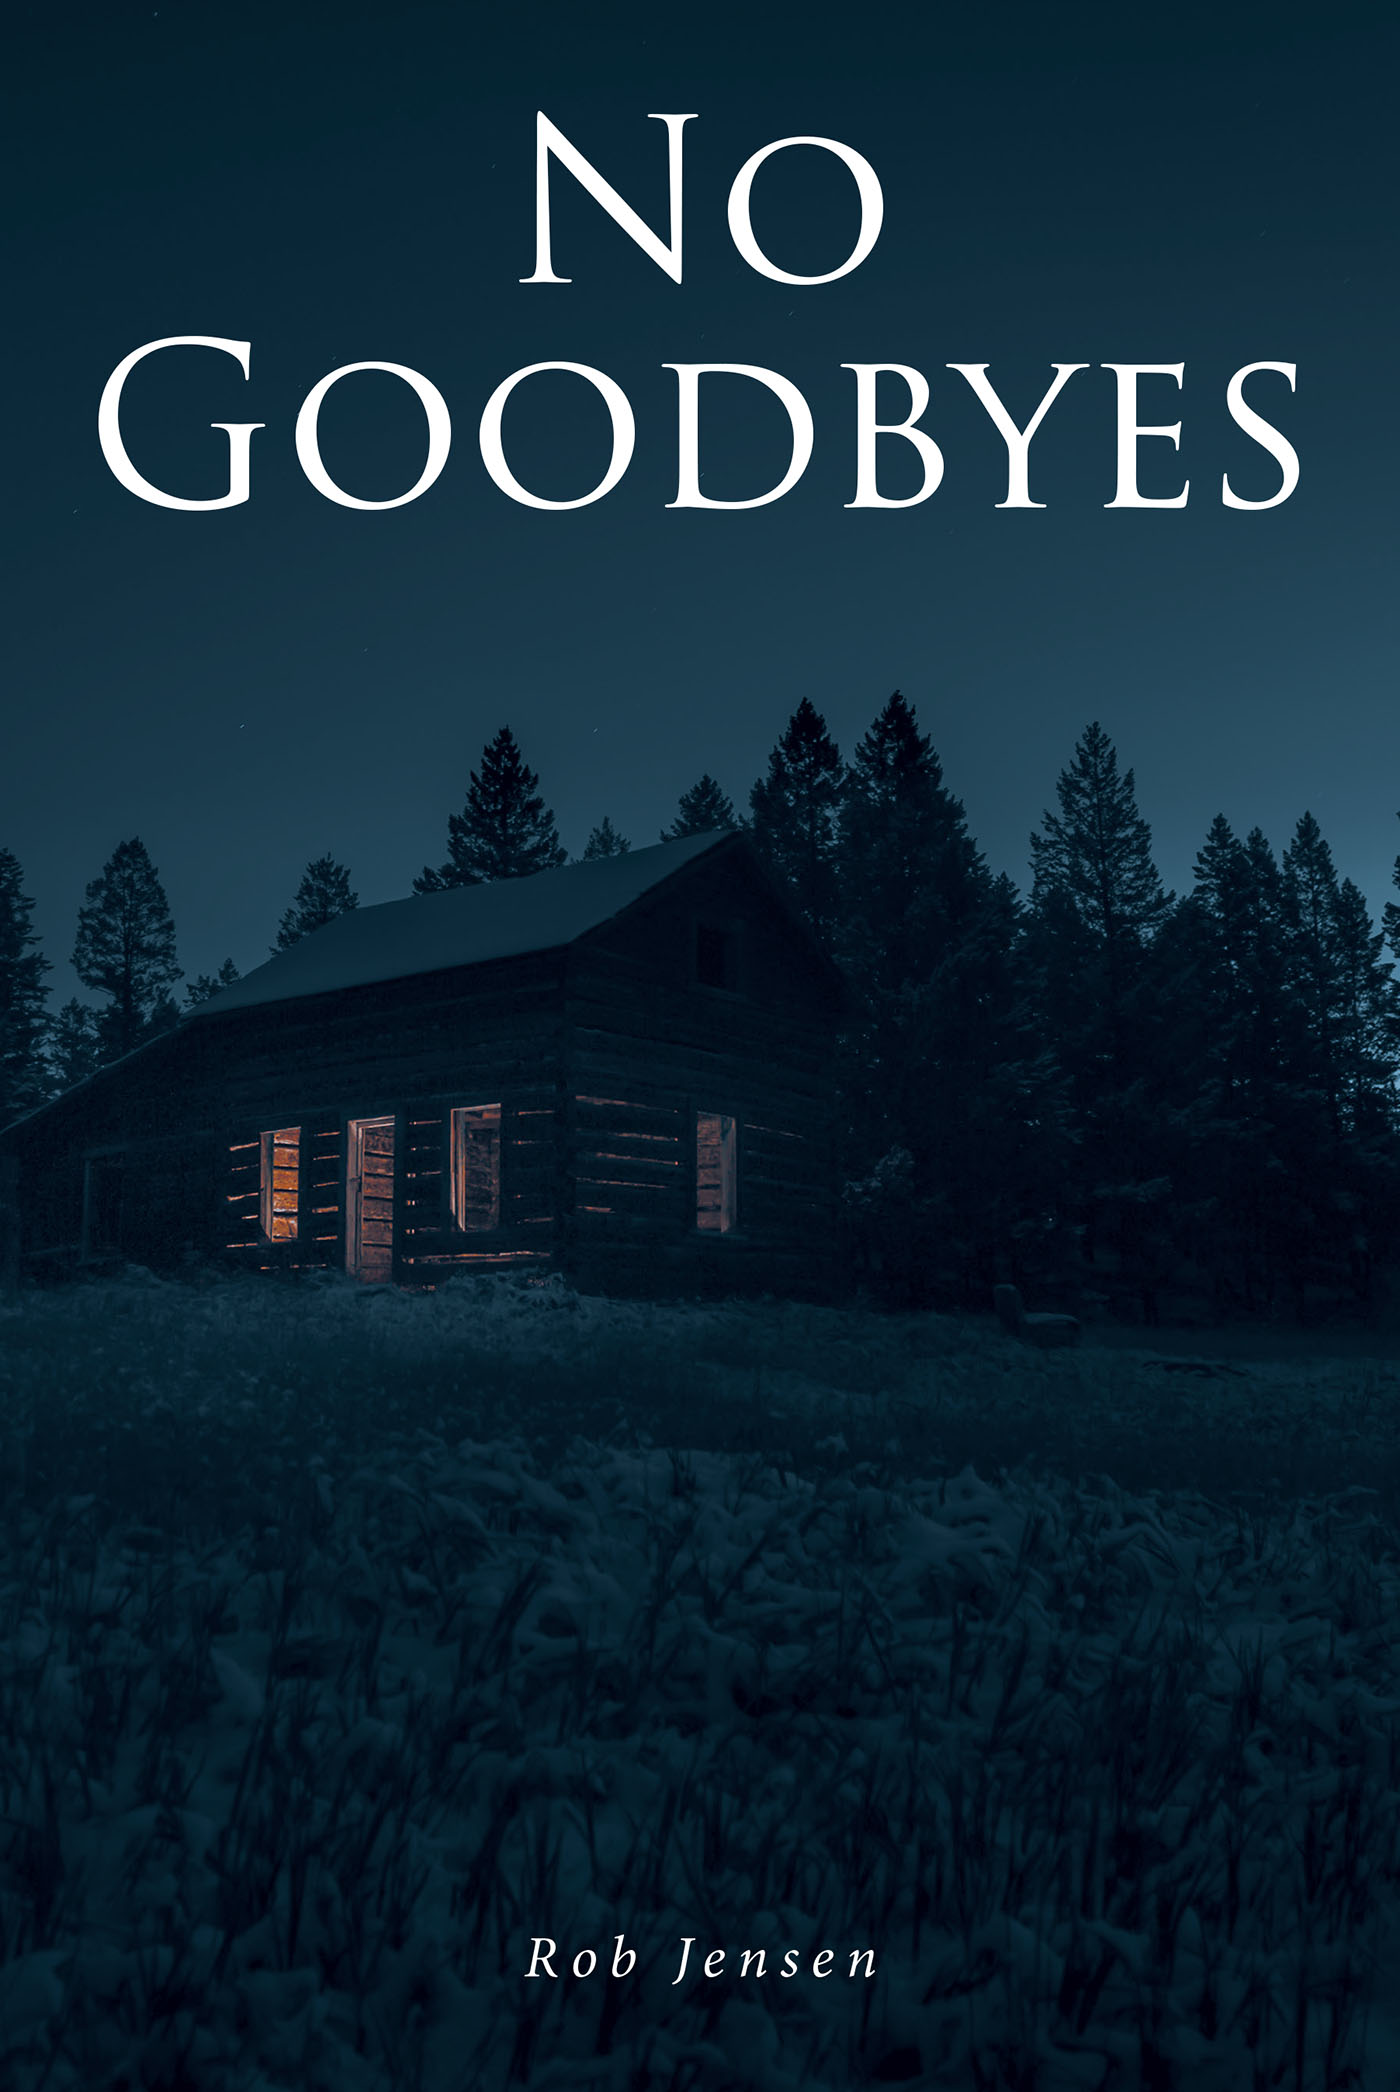 Rob Jensen’s New Book, "No Goodbyes," Centers Around an Attorney Who Risks His Entire World After Taking on a Client Whose Case Ends Up Being More Than He Bargained for